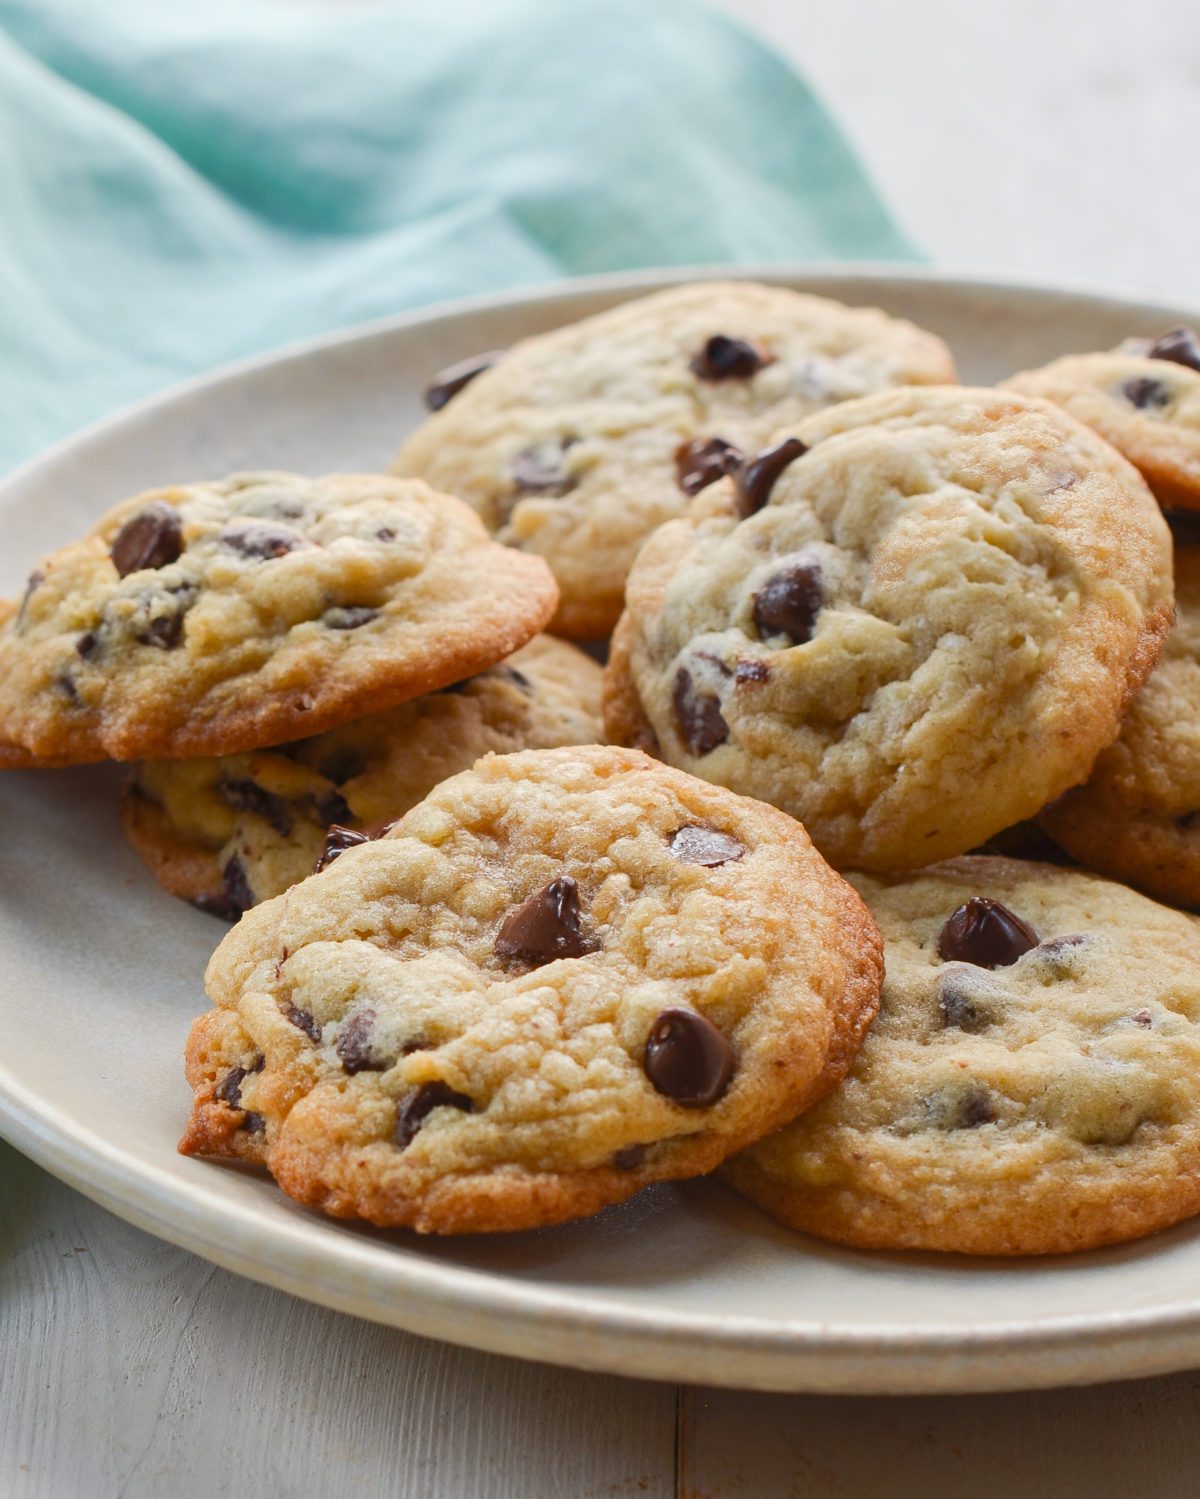 Cream Cheese Chocolate Chip Cookies - Bakes and Blunders